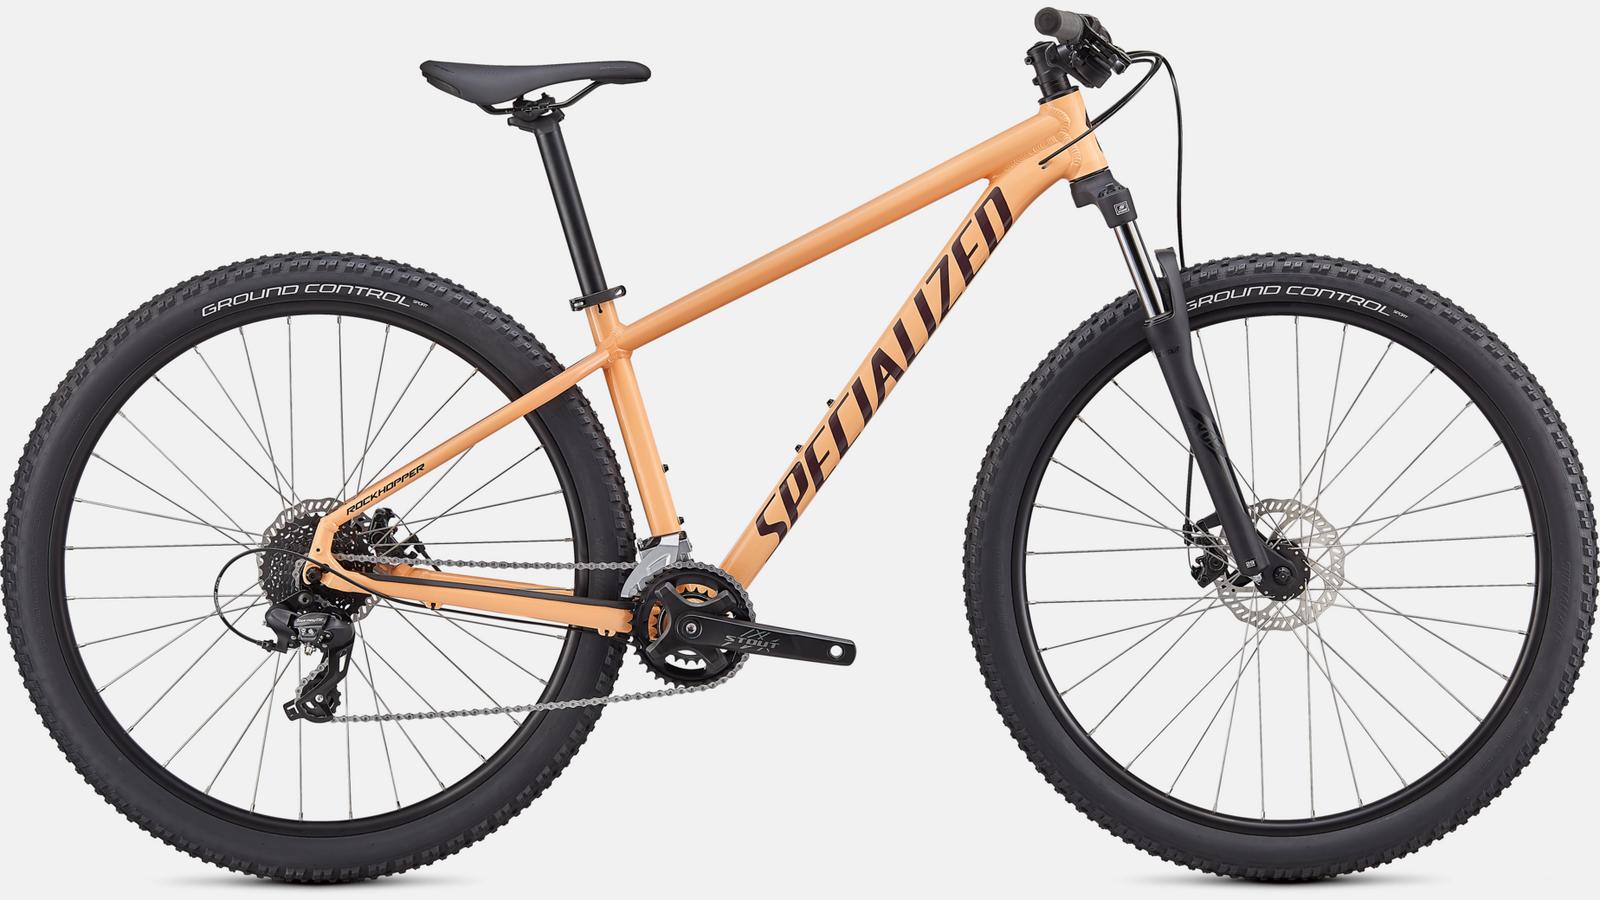 Paint for 2021 Specialized Rockhopper 27.5 - Gloss Ice Papaya